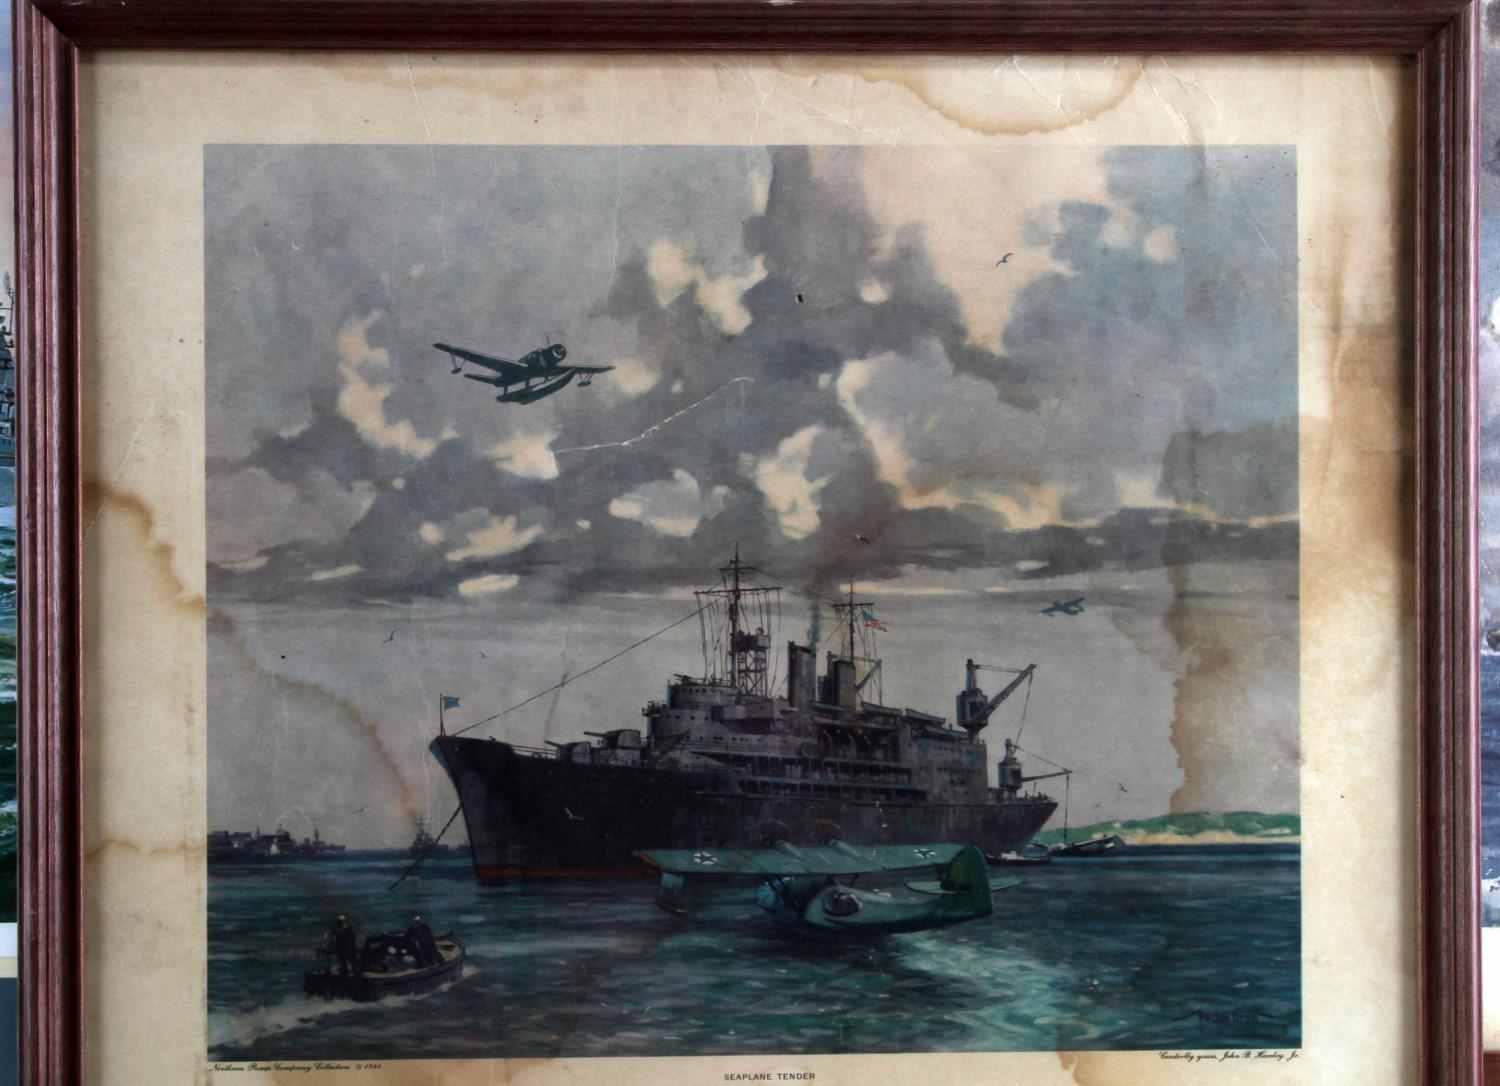 4 LITHOGRAPH PRINTS WWII MILITARY SHIPS FRAMED